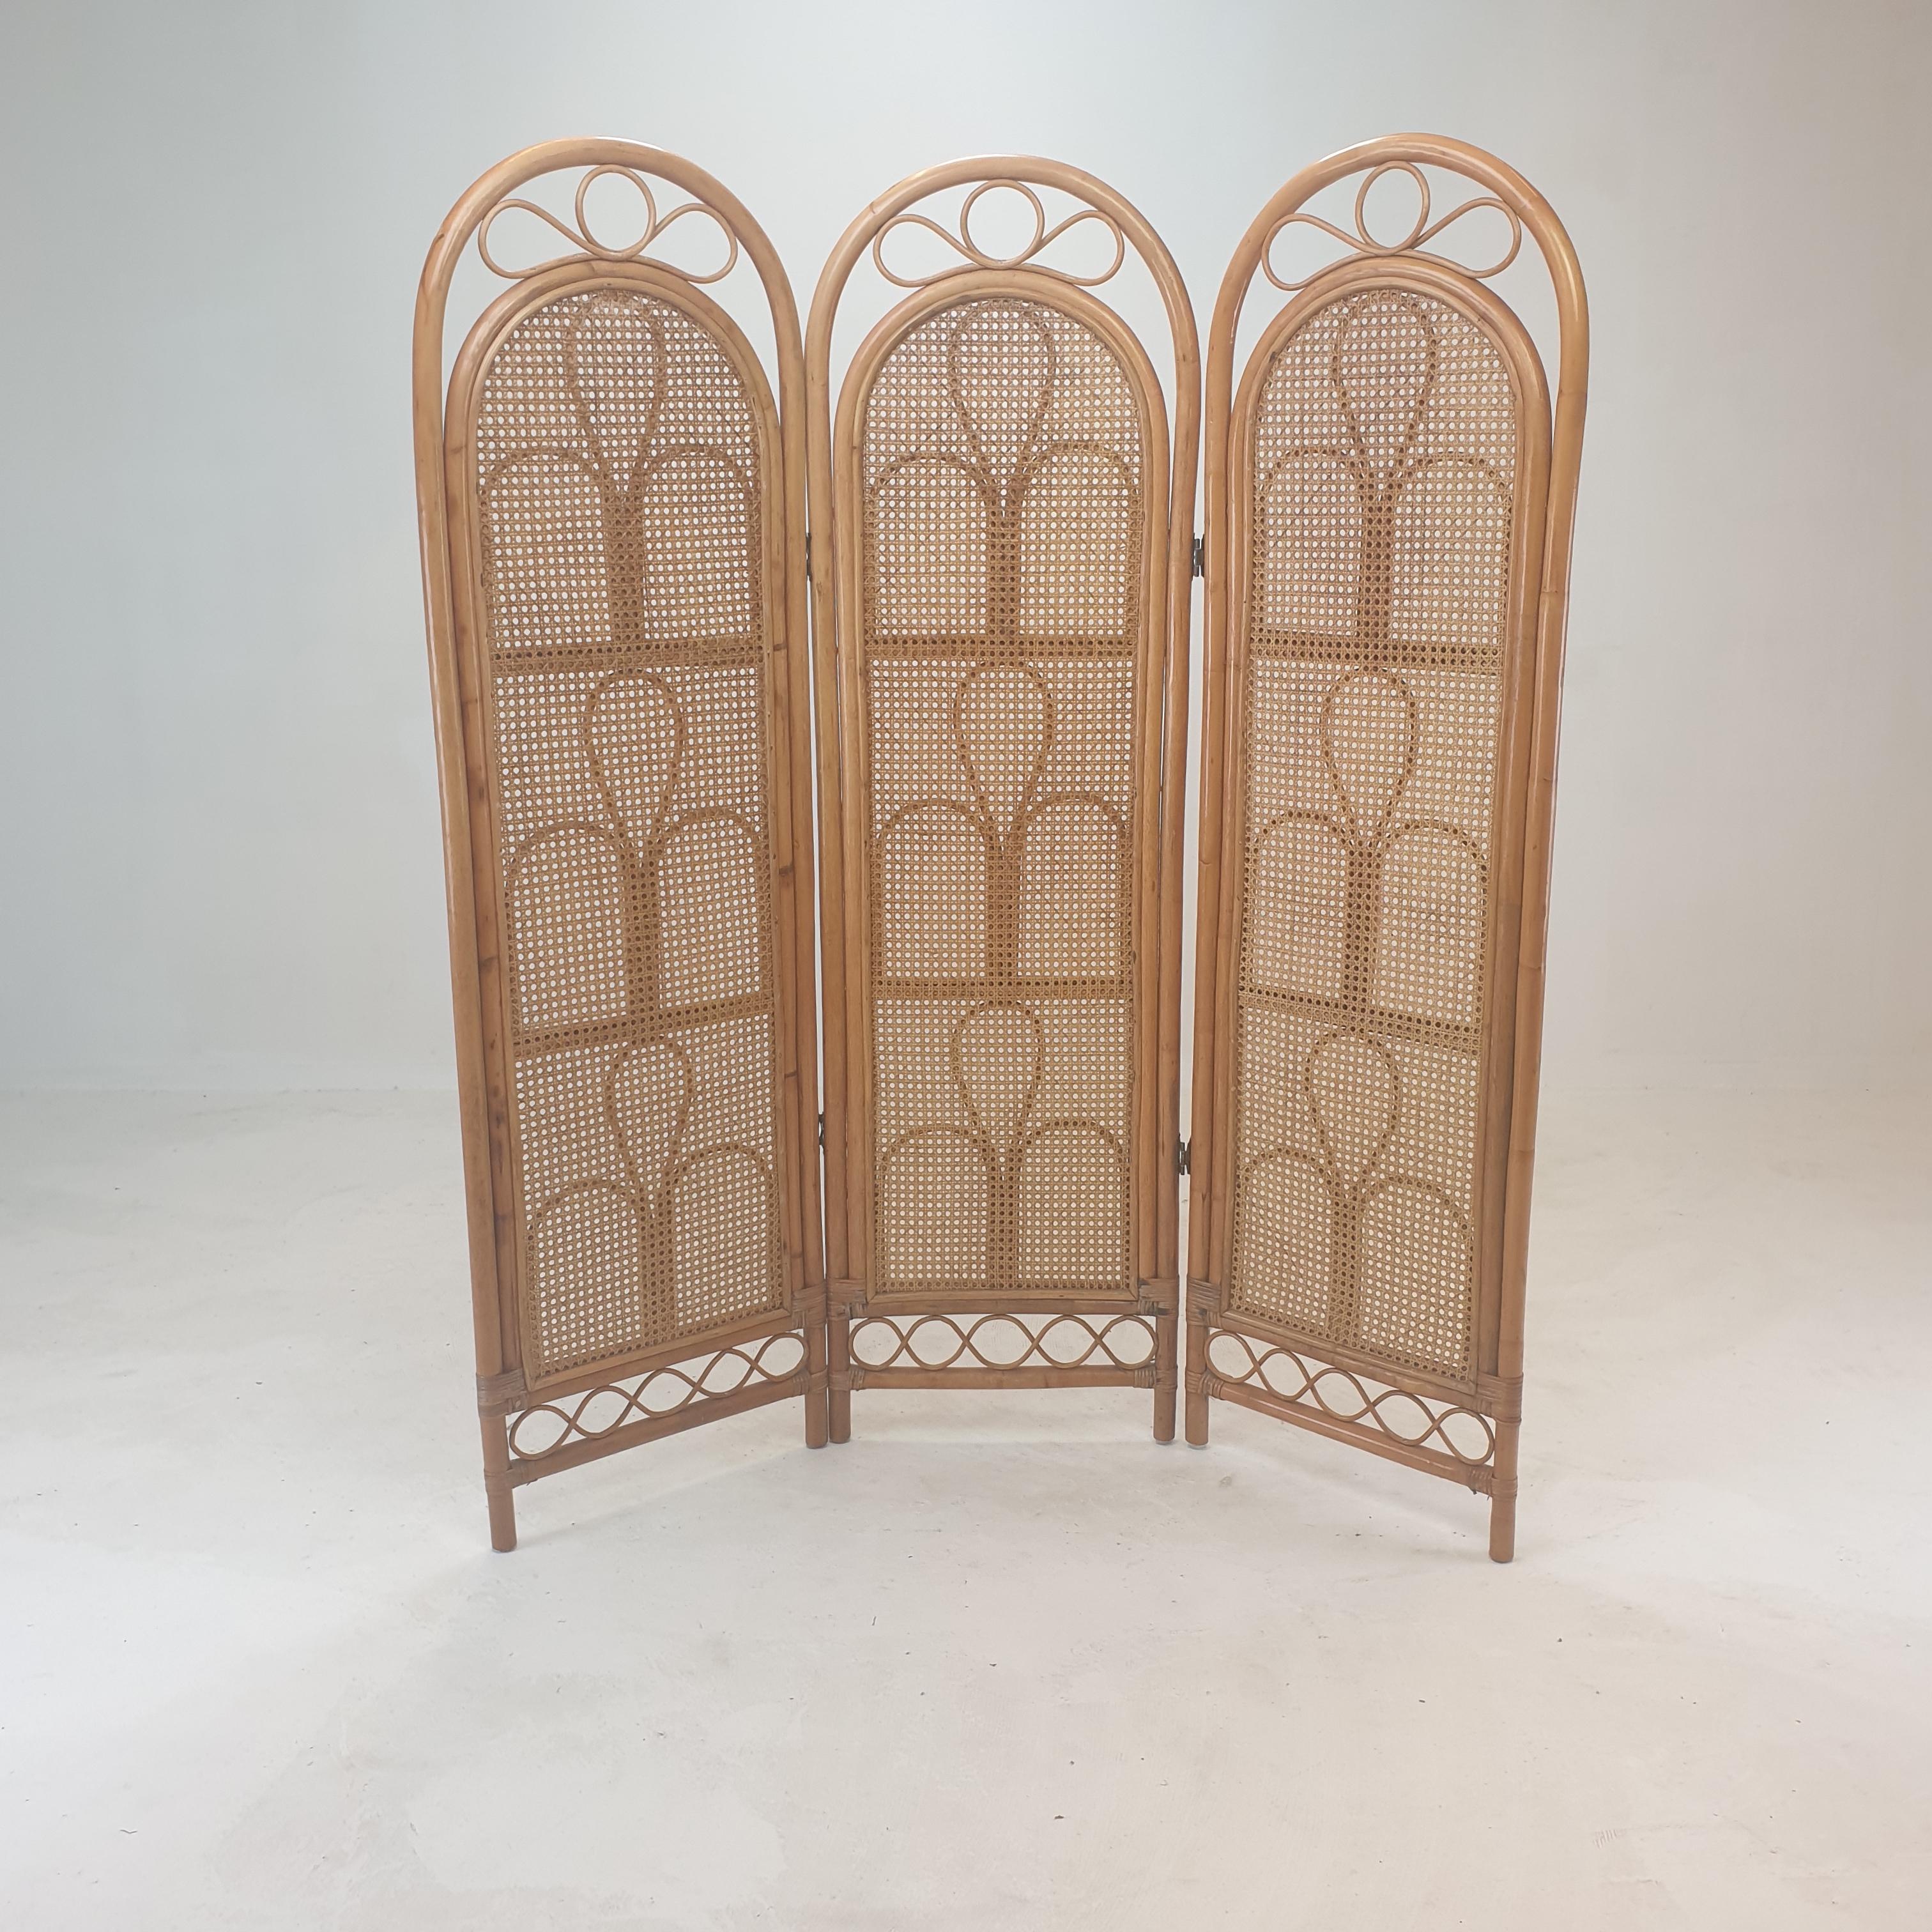 Italian Room Divider in Rattan and Wicker, 1960s For Sale 4